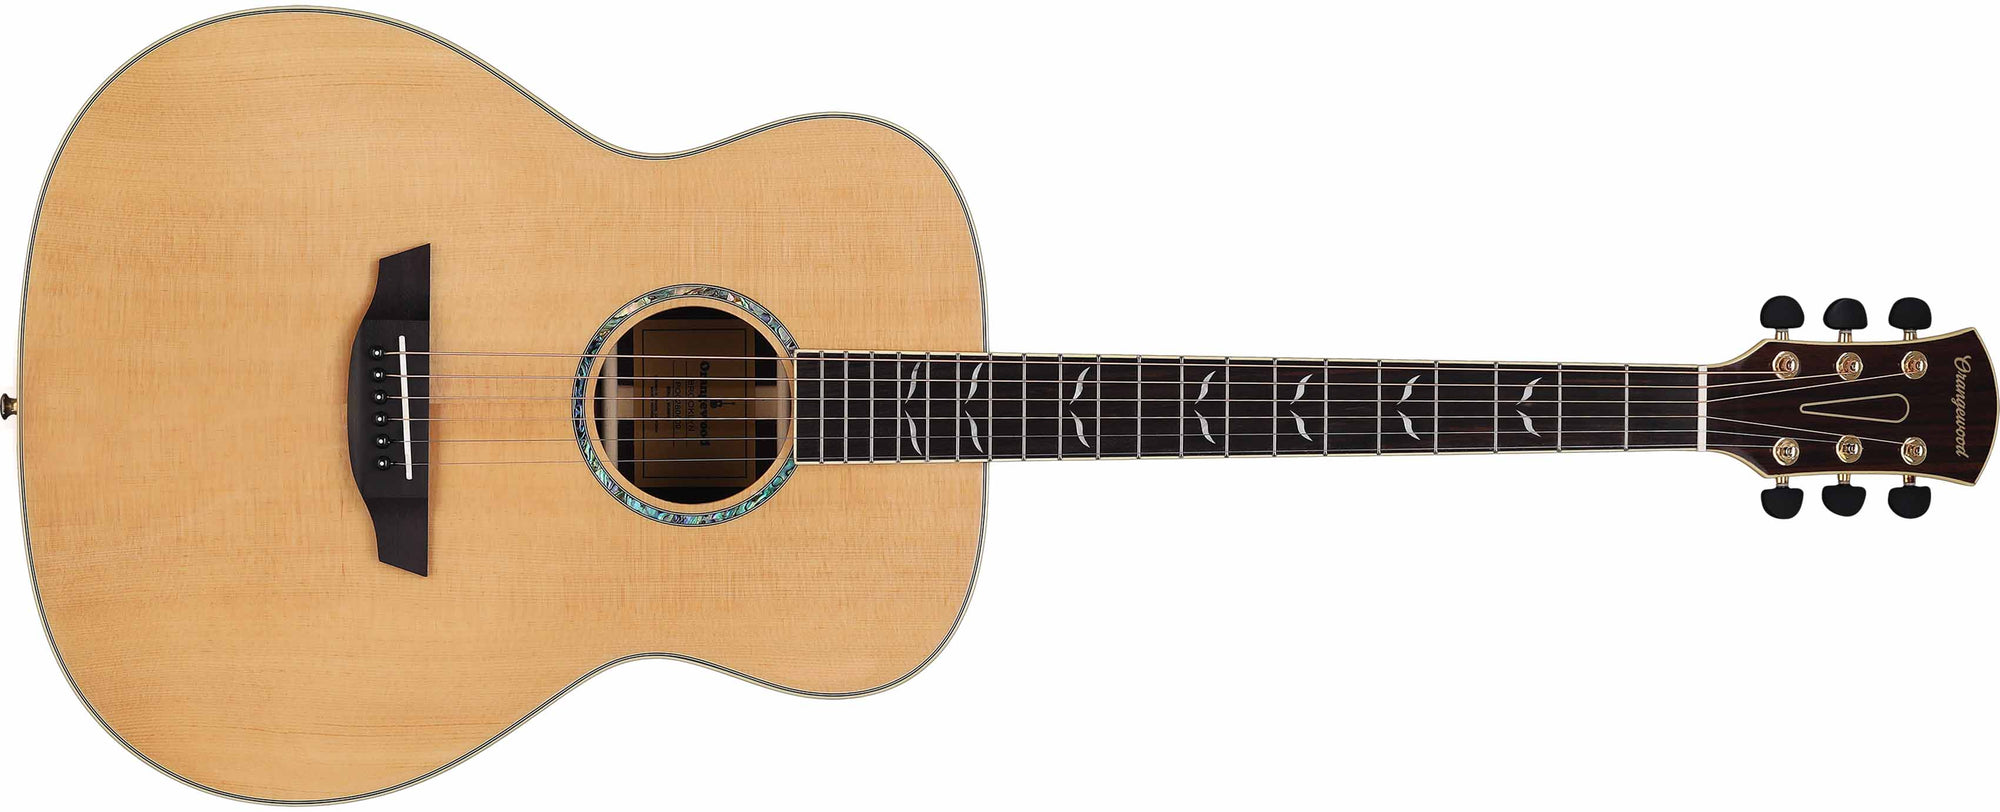 Spruce grand concert acoustic guitar with abalone rosette, mother of pearl fretboard inlays, and gold hardware